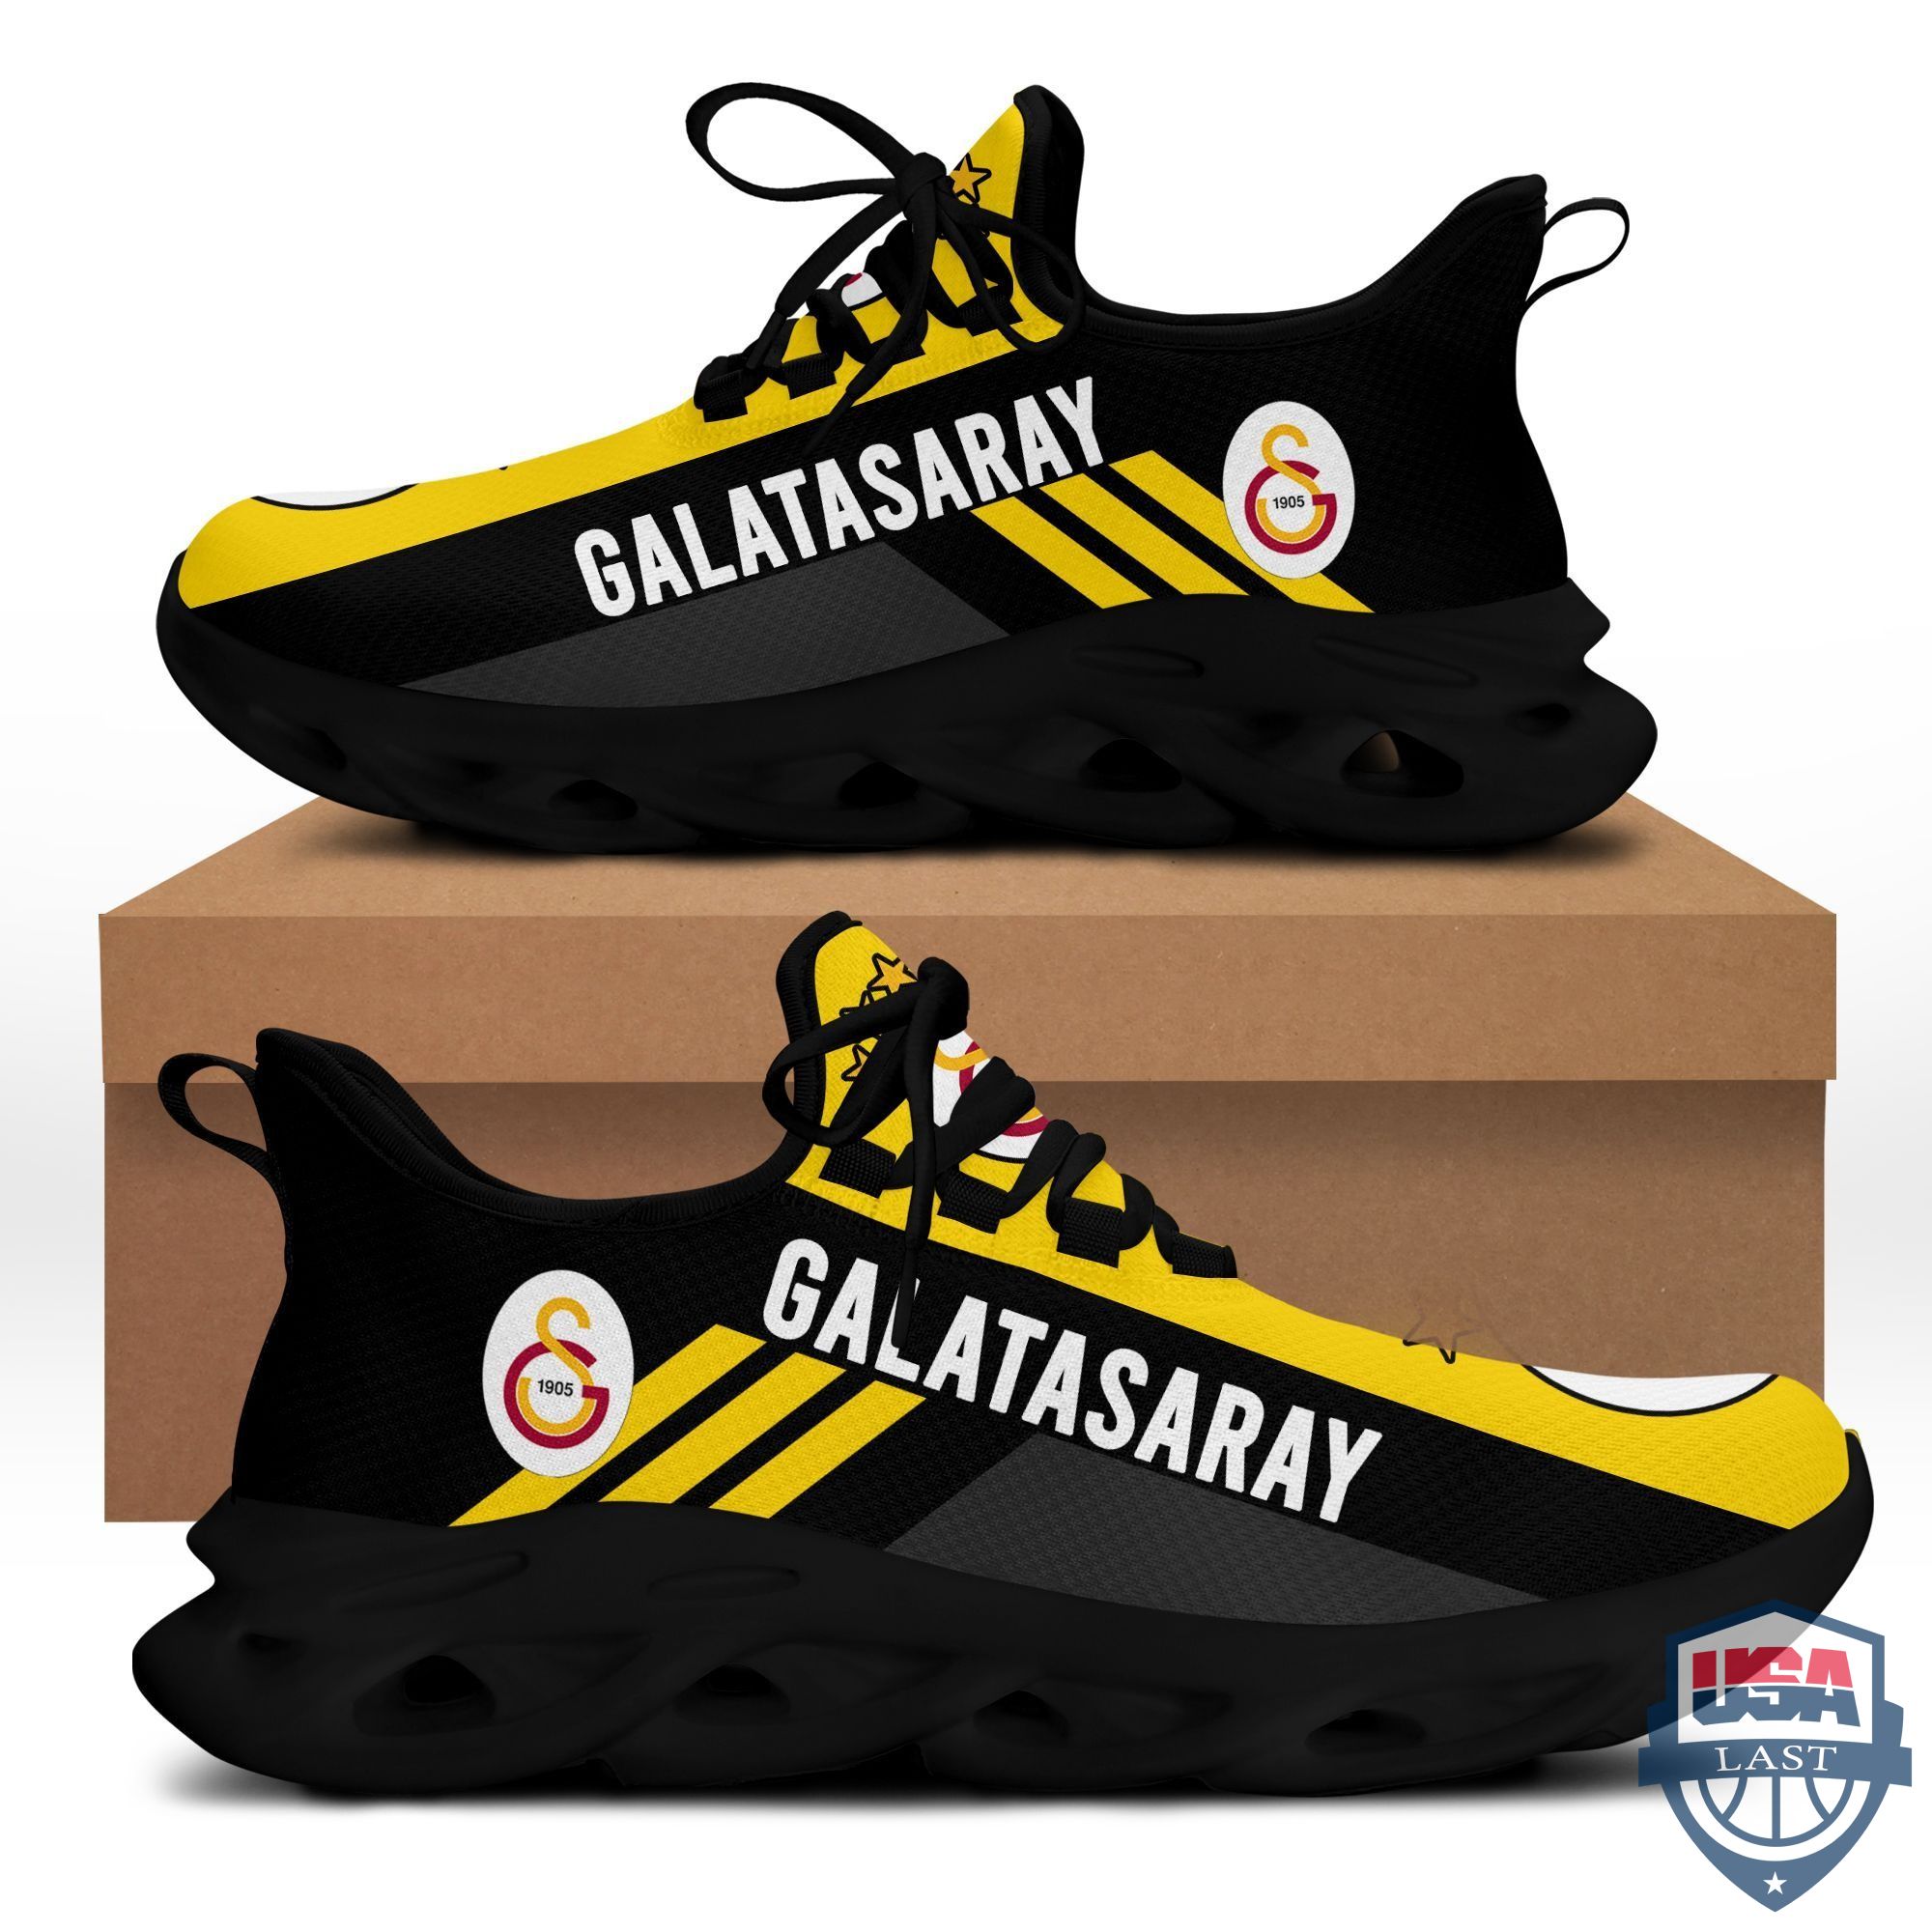 Top Trending – Galatasaray Sneaker Max Soul Shoes Yellow Version